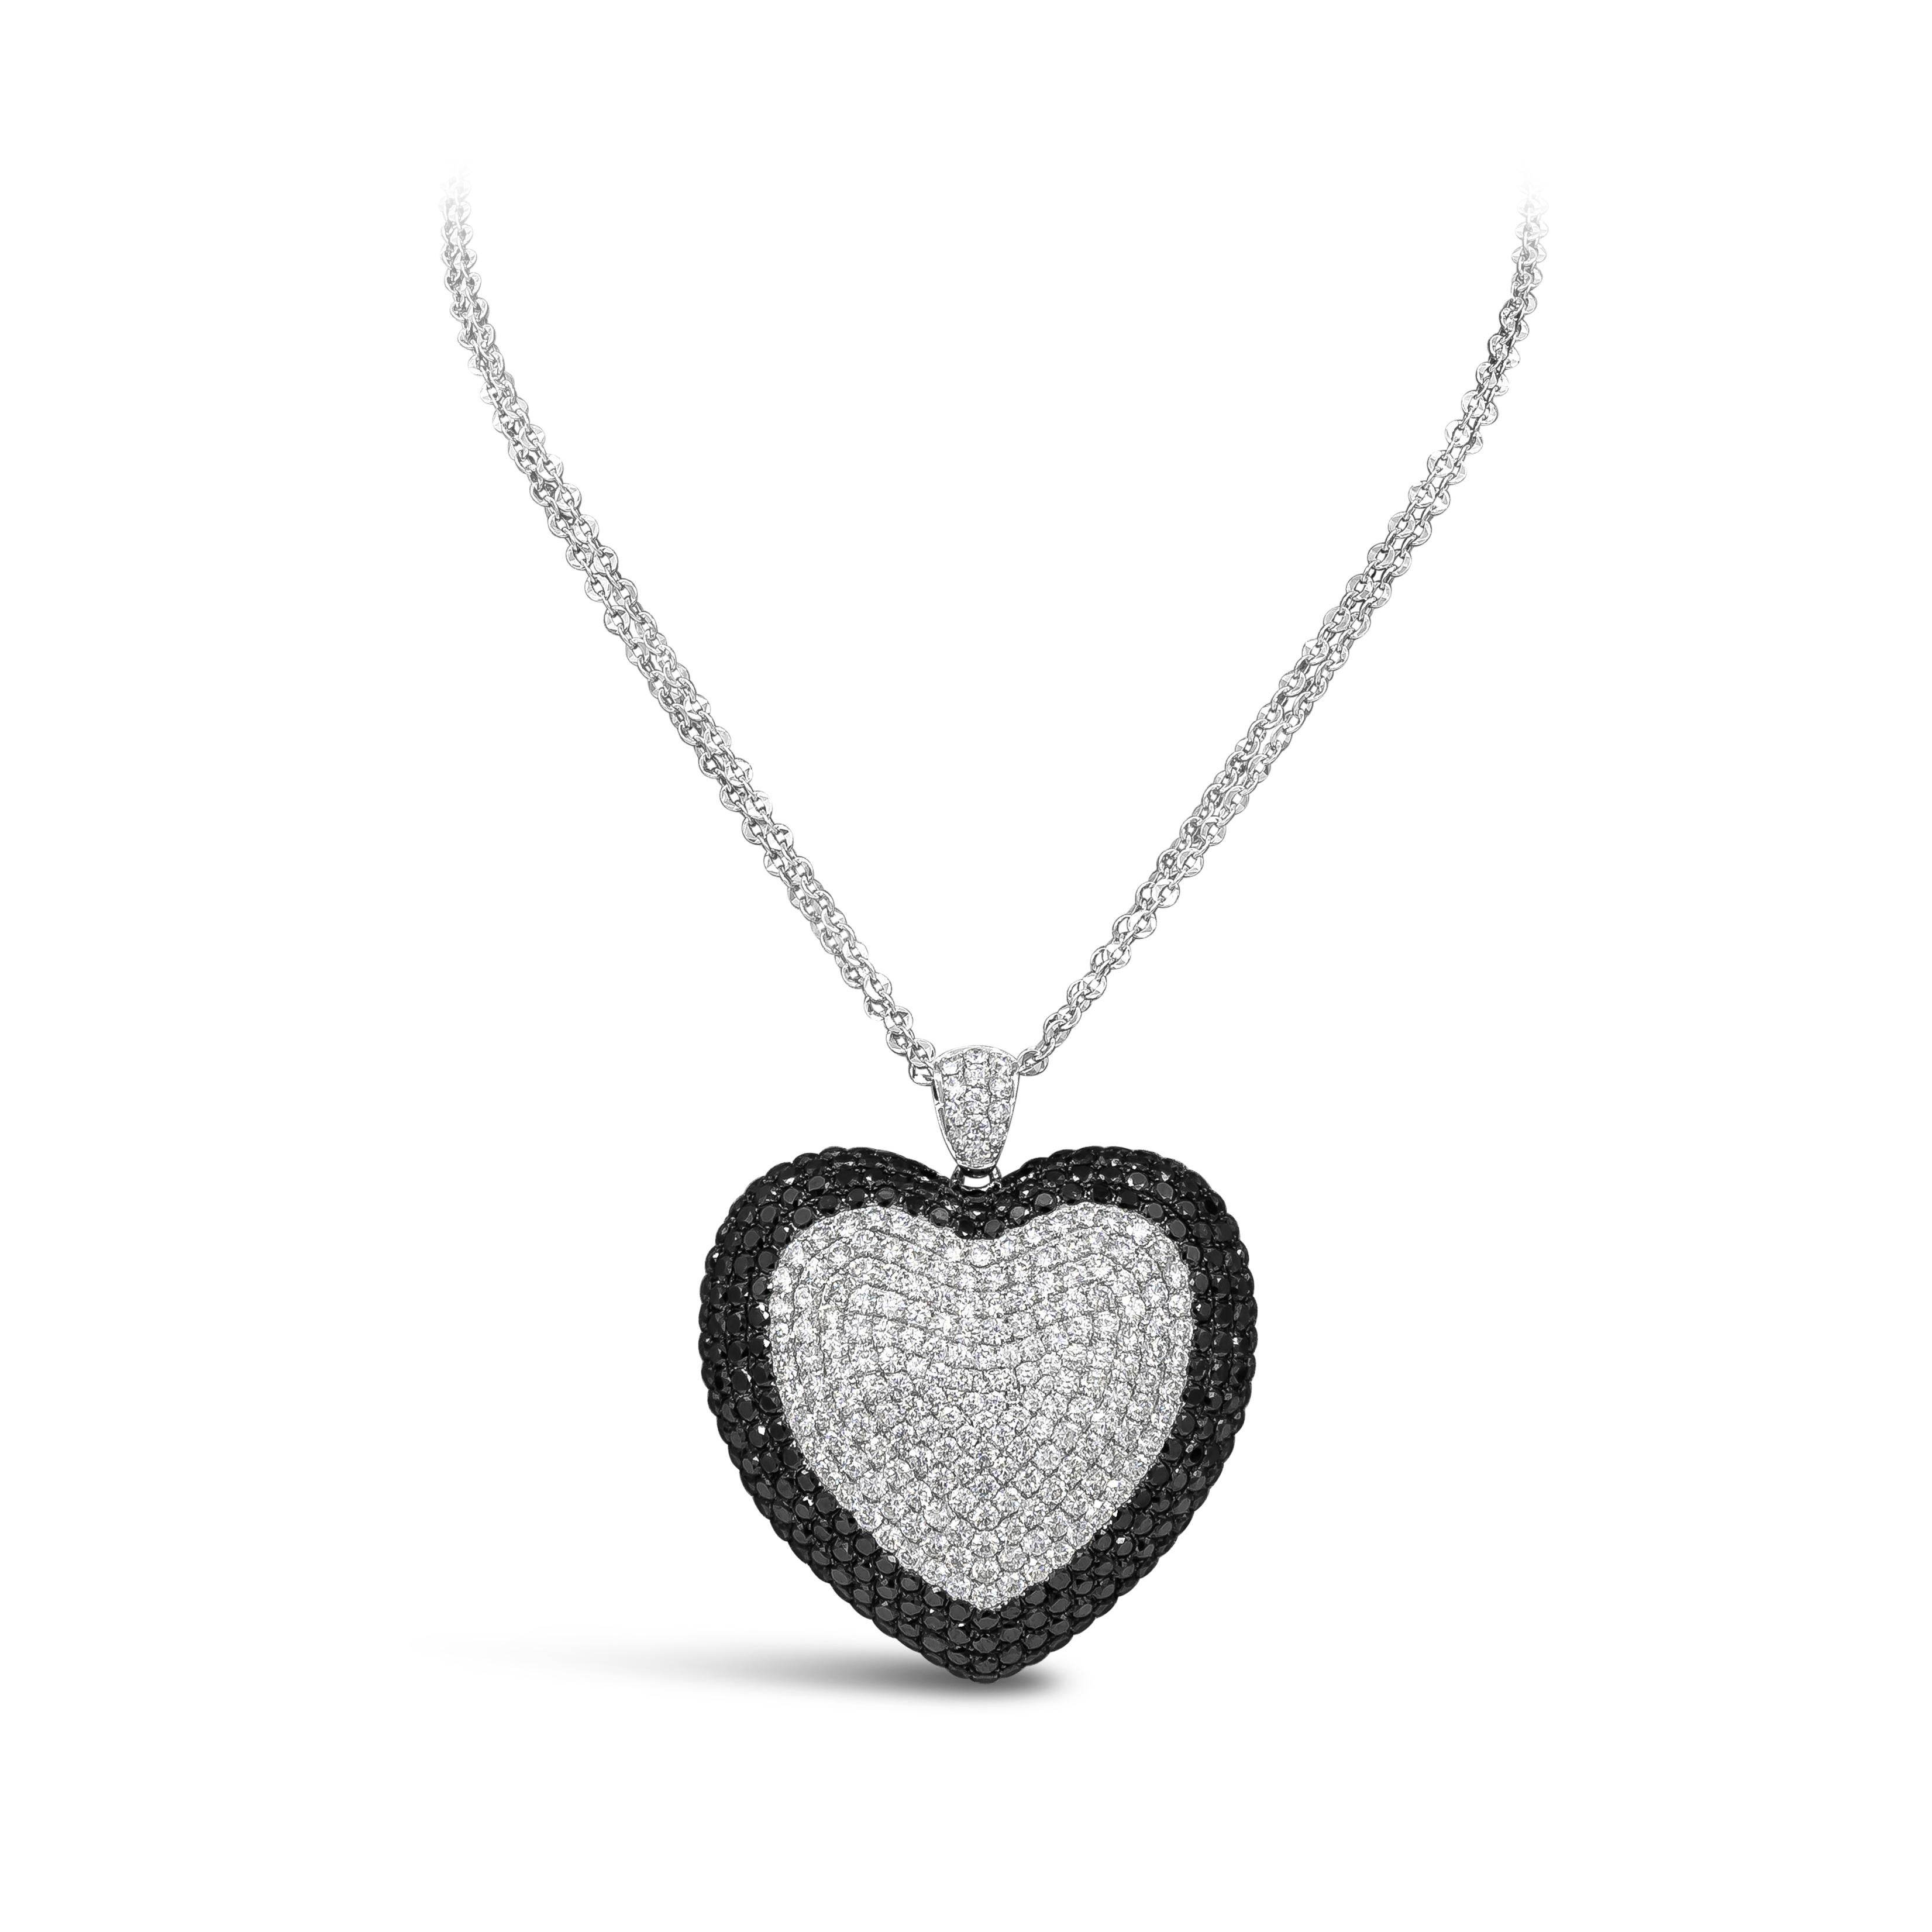 Features an oversized heart shape pendant pave set with black diamonds on the outer edges weighing 10 carats total. Encrusted with white diamonds in the middle weighing 7.70 carats total. Suspended on a 18inch adjustable chain and finely made in 18k